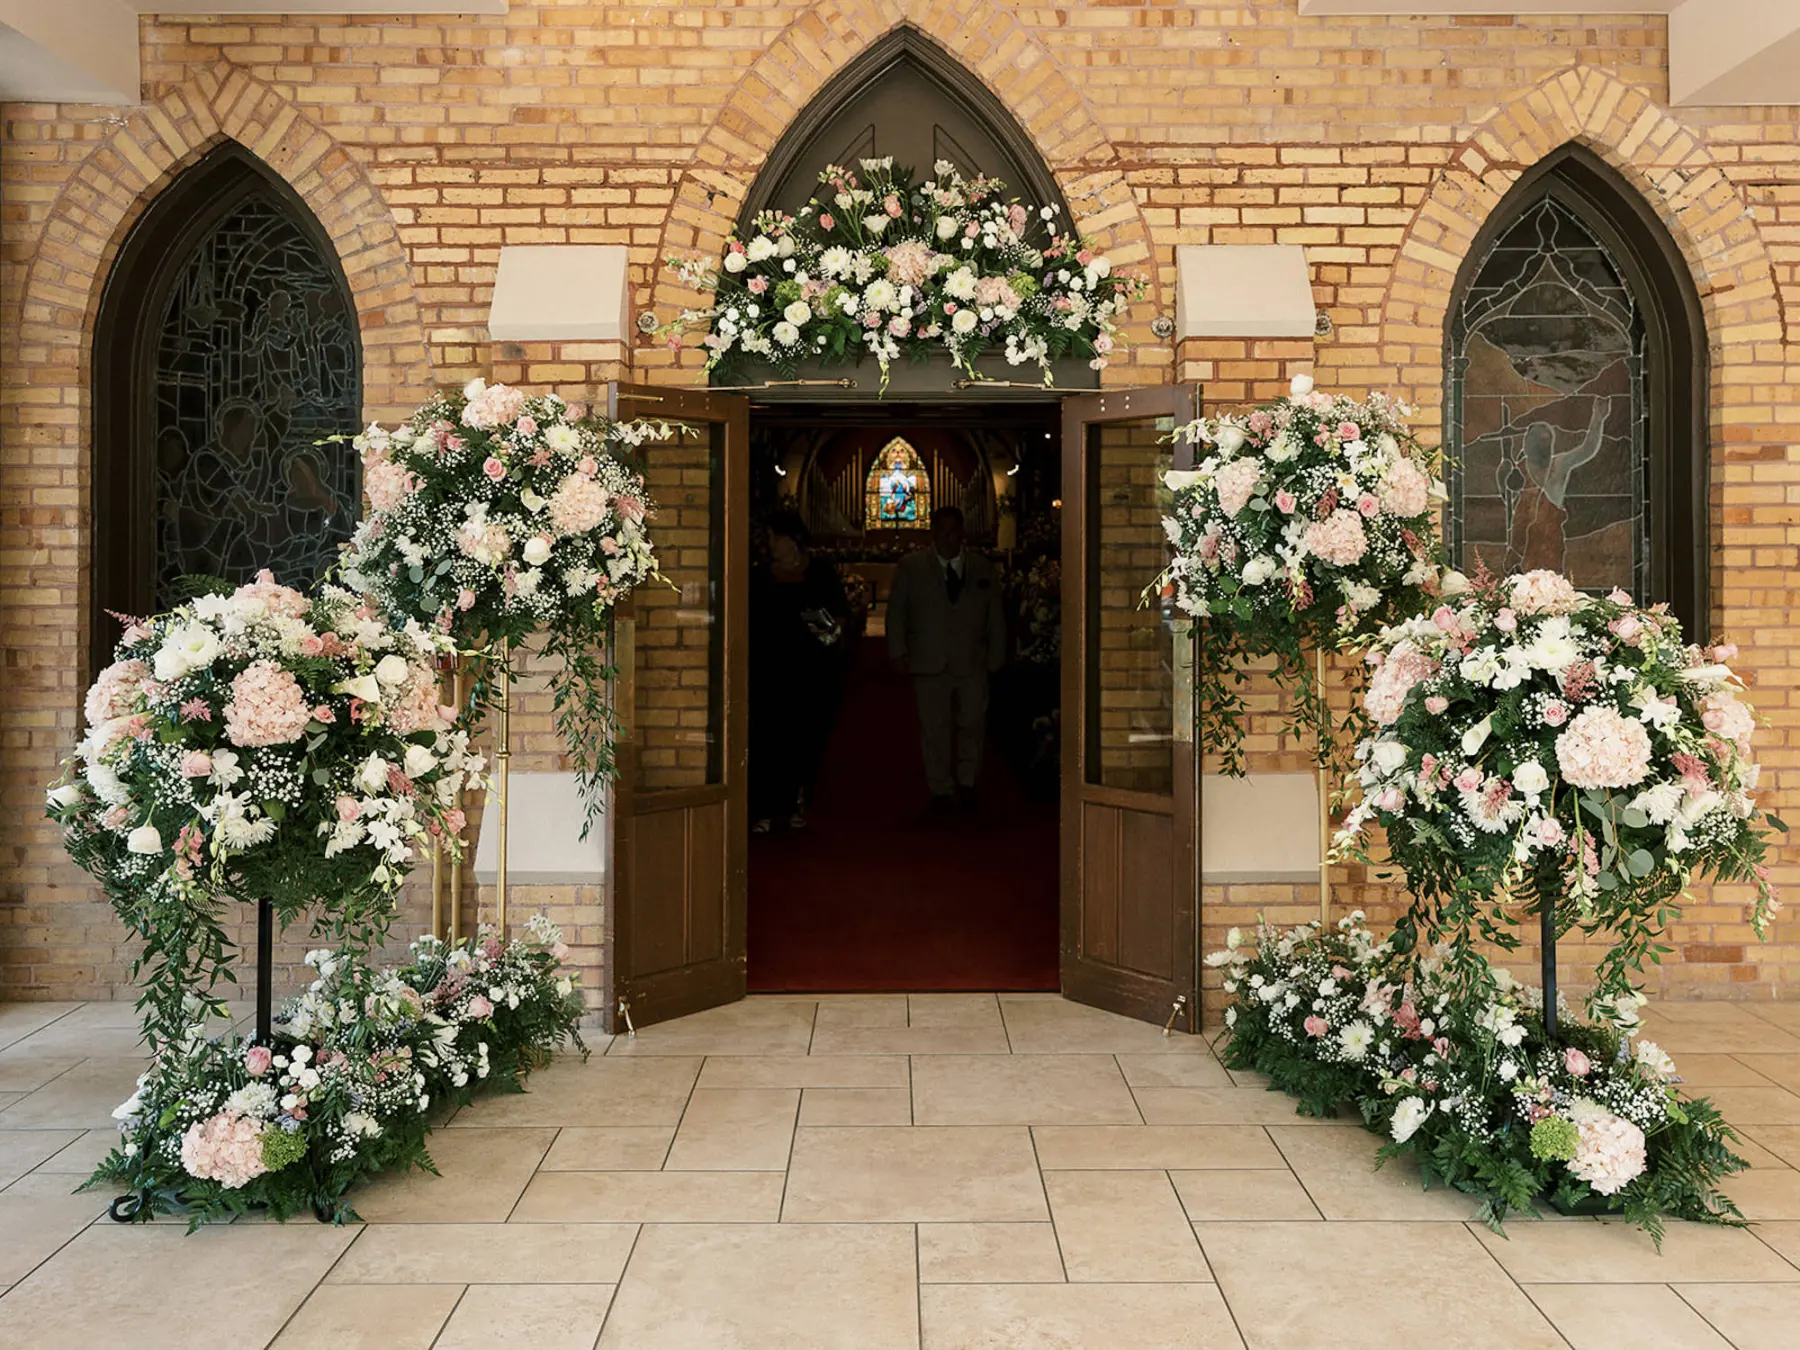 Whimsical Church Wedding Ceremony Entrance Decor Ideas | Pink Roses, White Hydrangeas, Baby's Breath, Fern, and Greenery Flower Arrangements | Cathedral Church of St. Peter St Pete